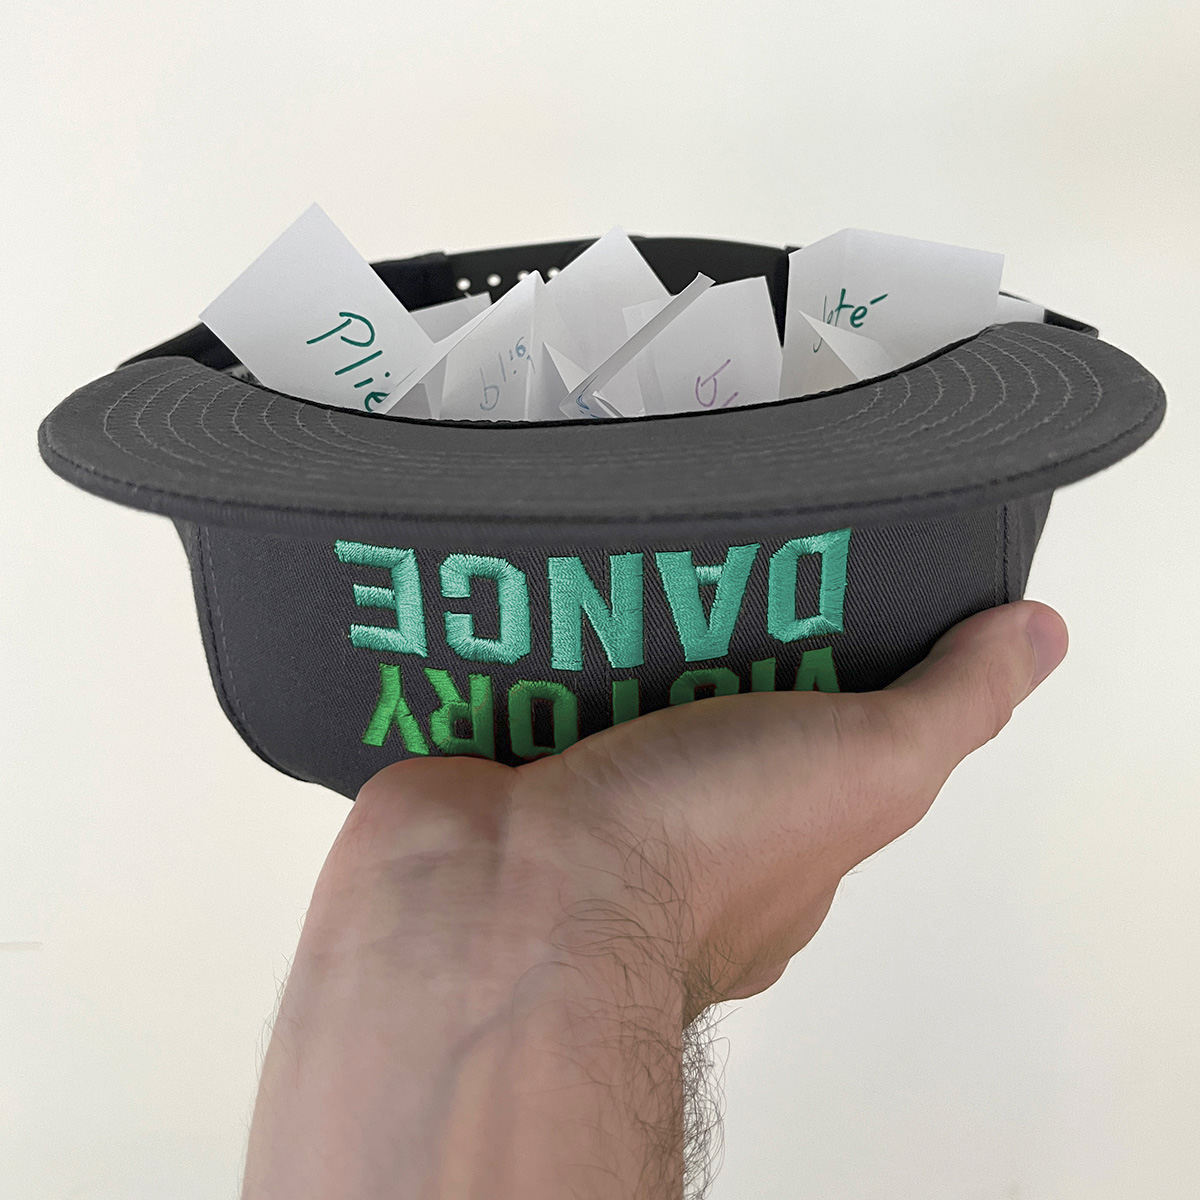 A hand holding a New Victory Dance cap full of folded slips of paper